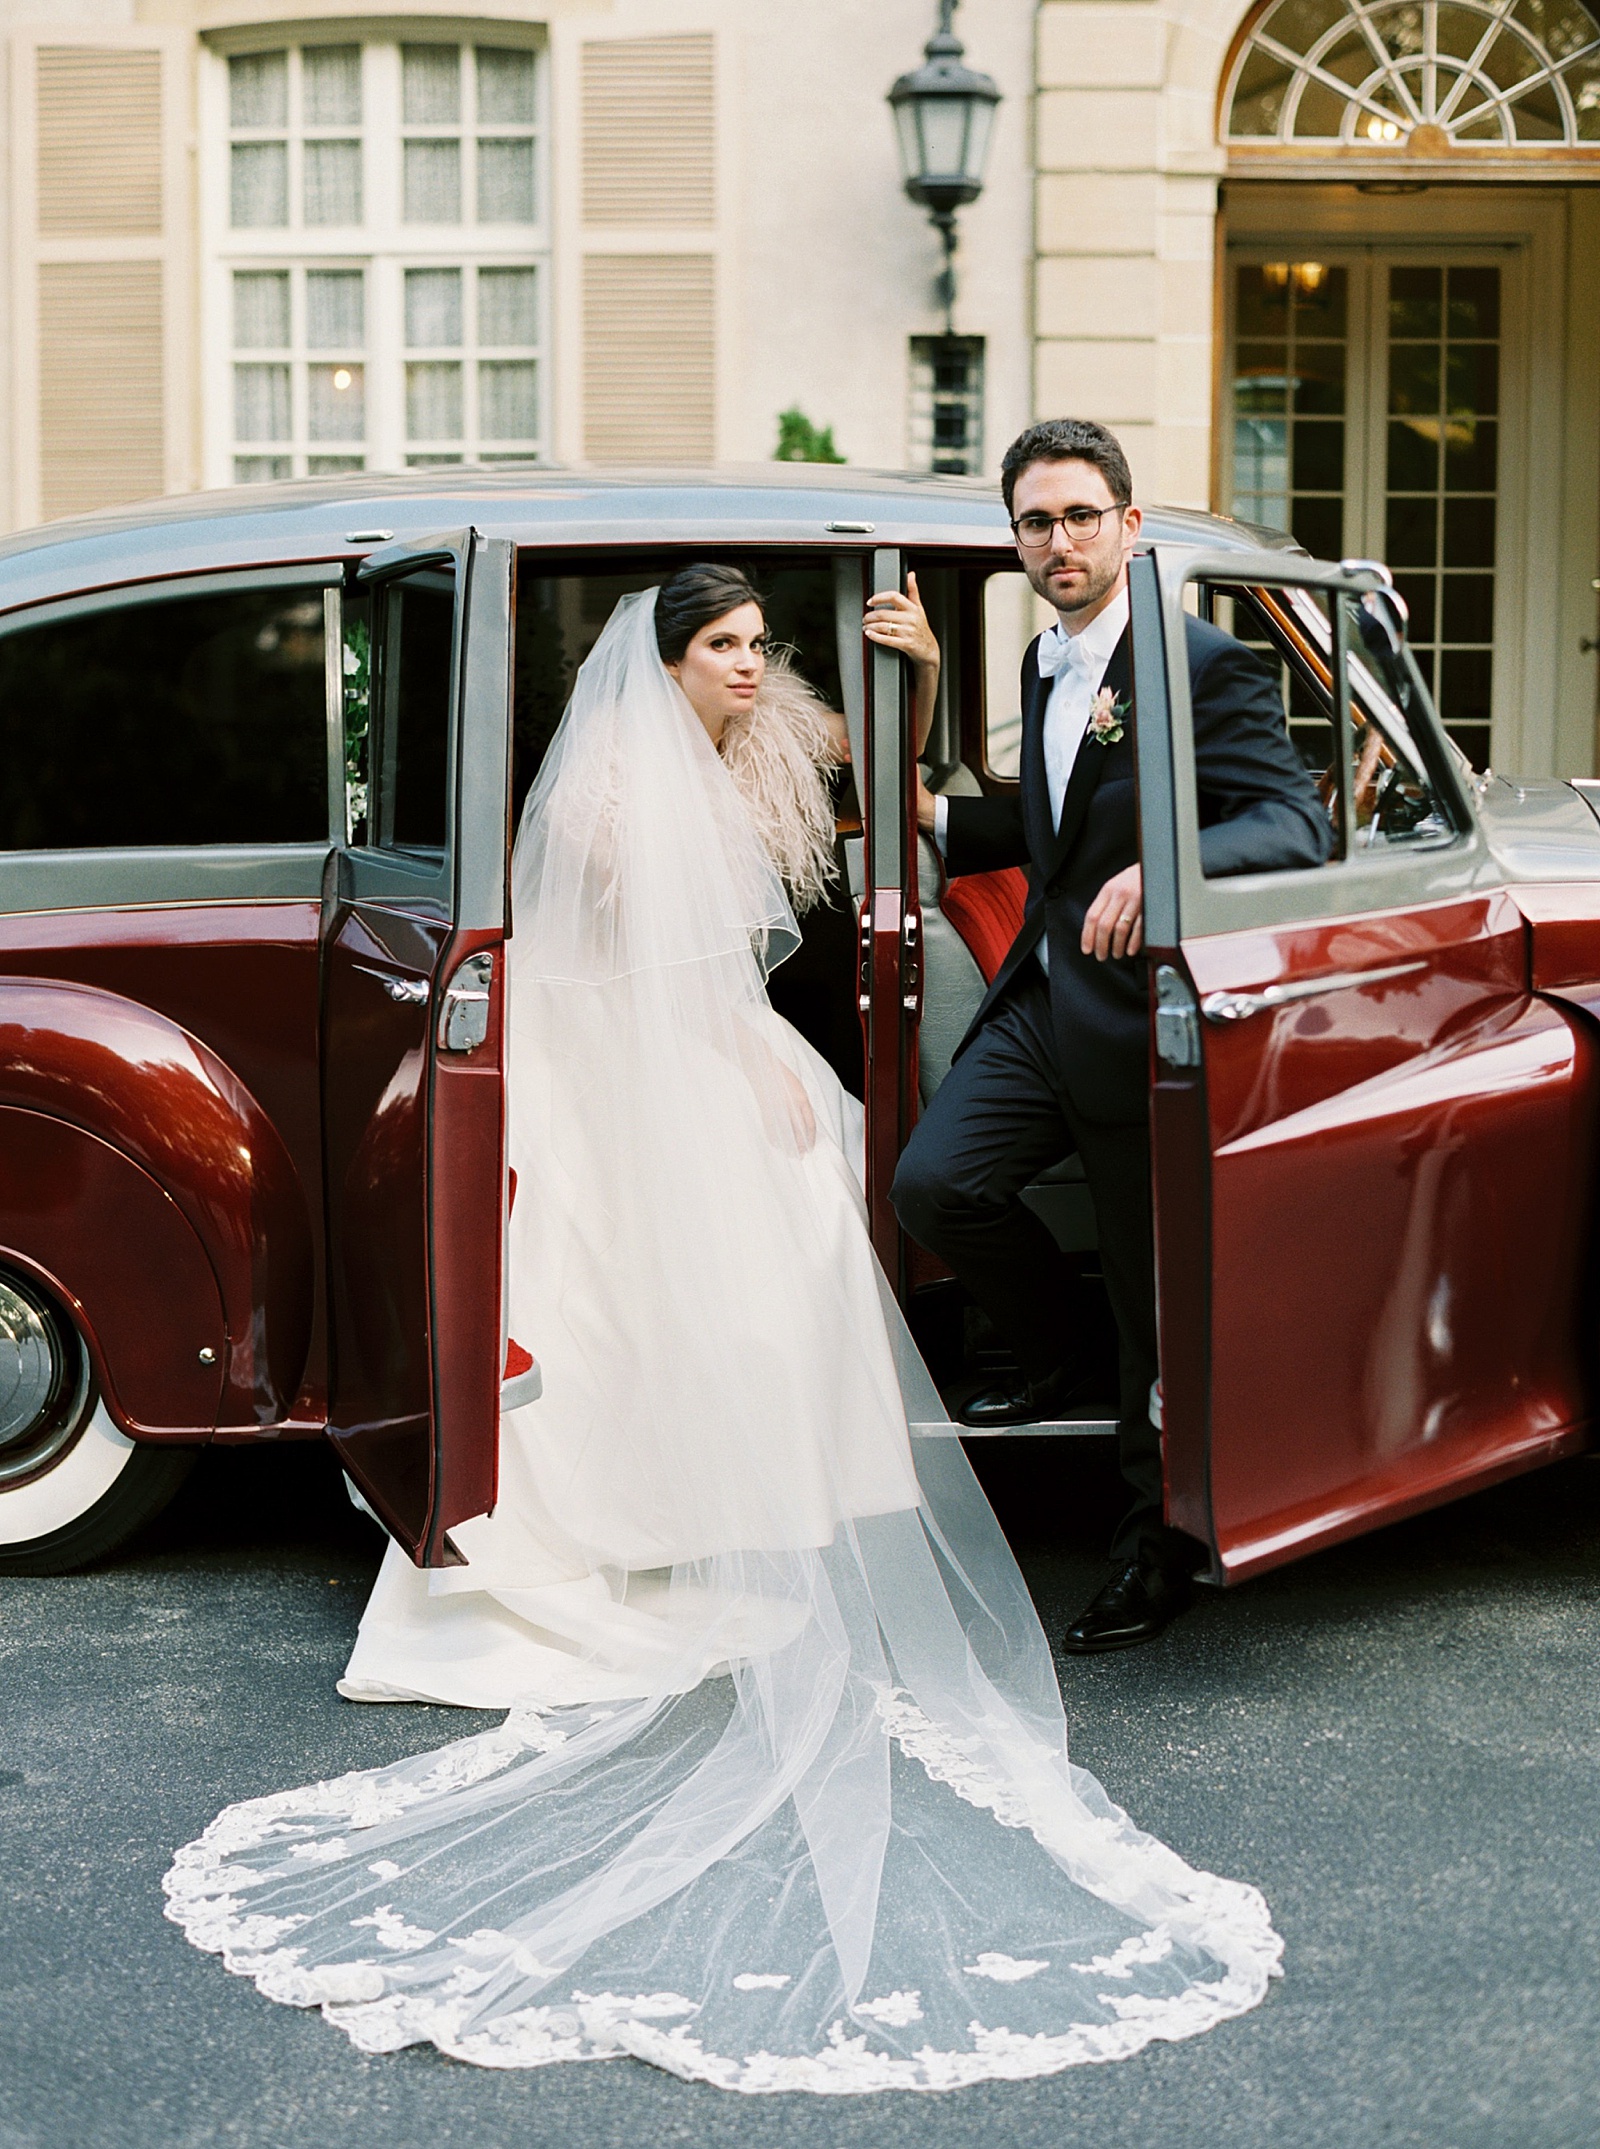 Bride and groom posed around a vintage red car, looking at the camera.